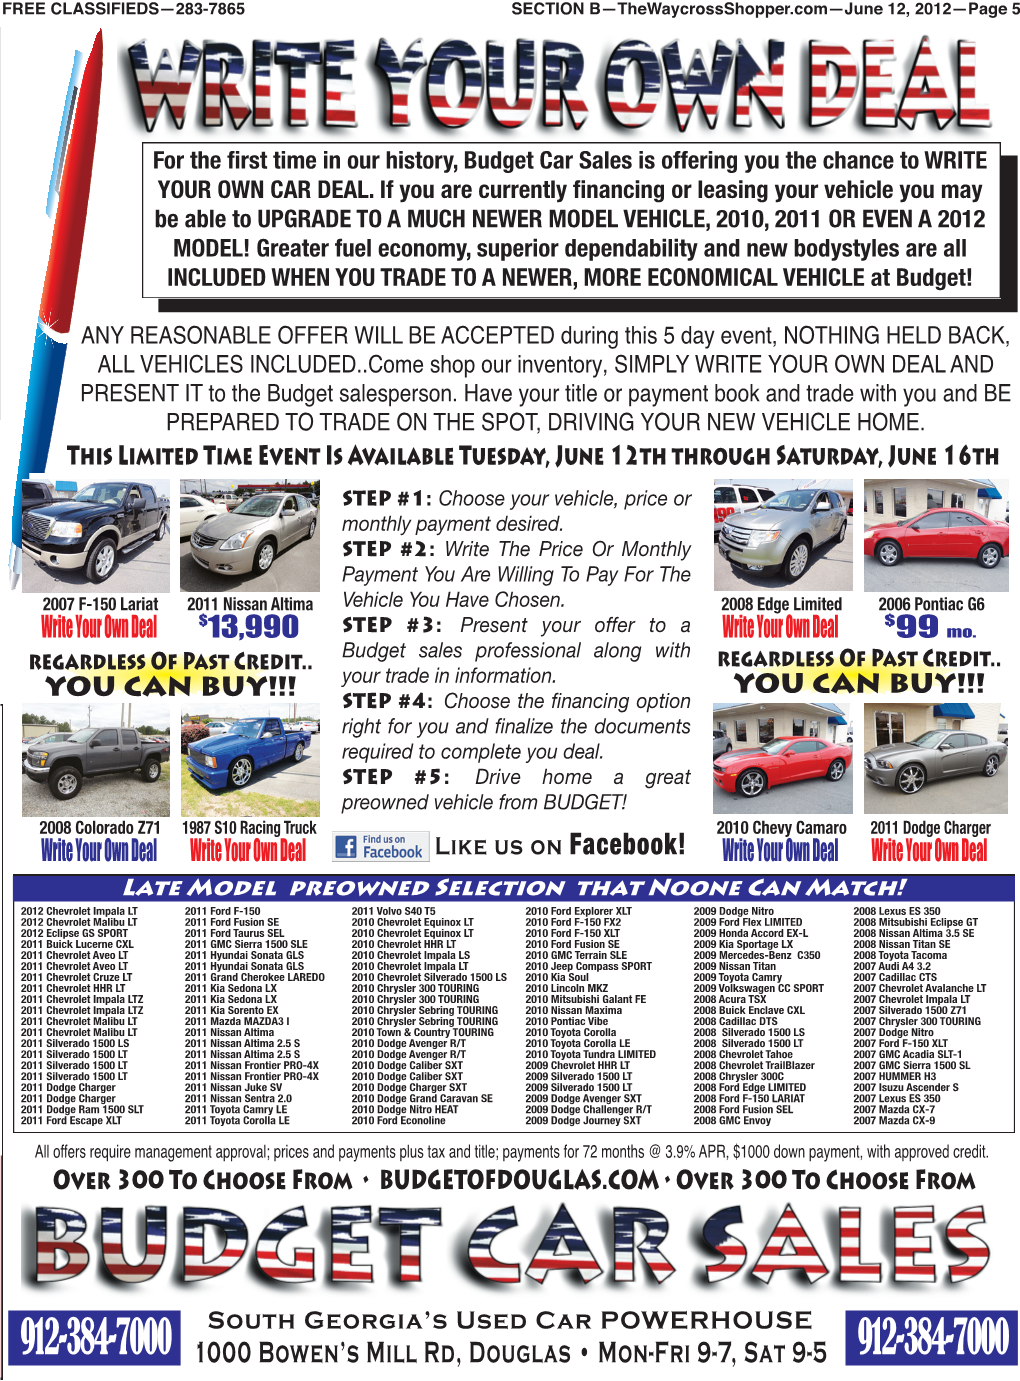 For the First Time in Our History, Budget Car Sales Is Offering You the Chance to WRITE YOUR OWN CAR DEAL